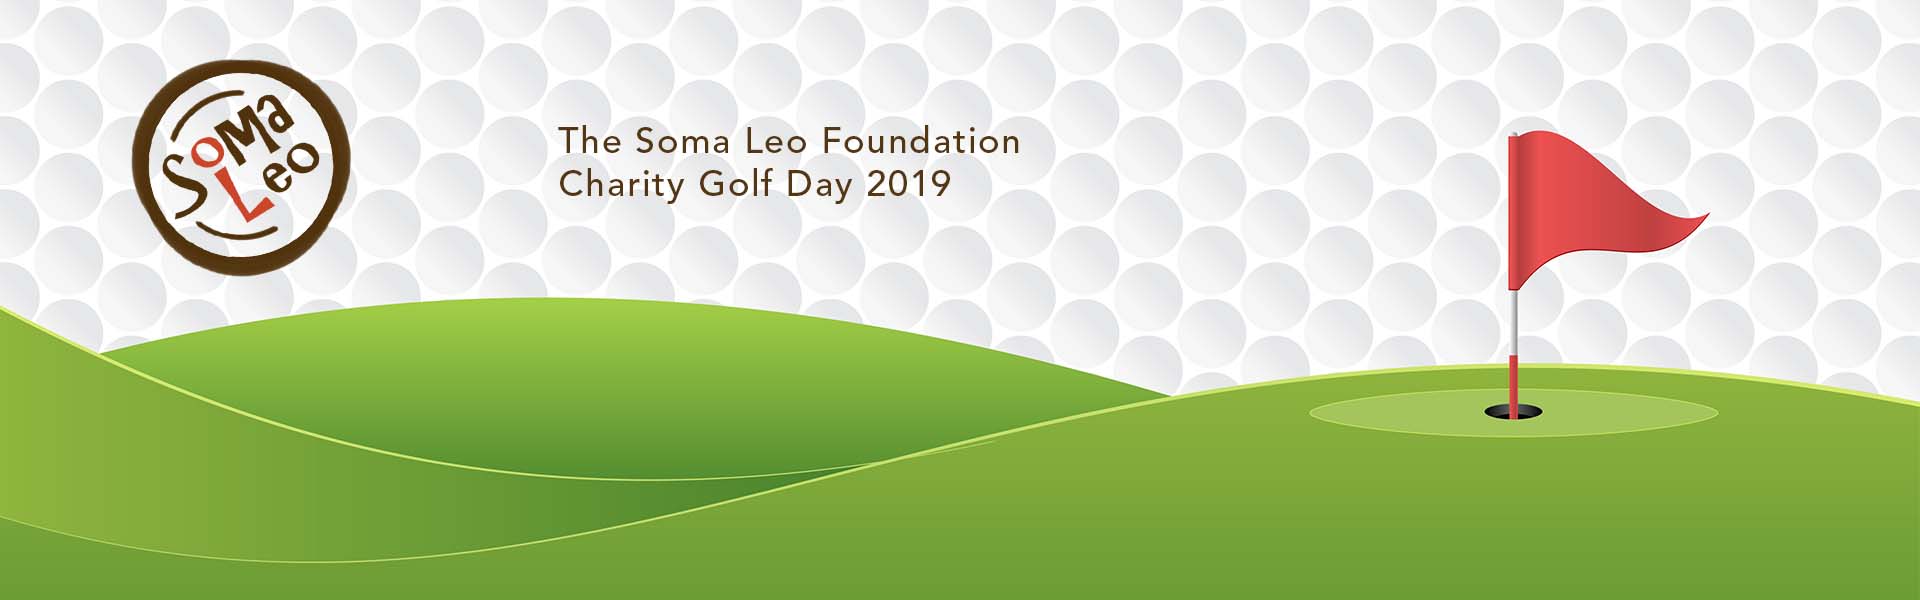 Charity golf day raises over £4,000 for The Soma Leo Foundation